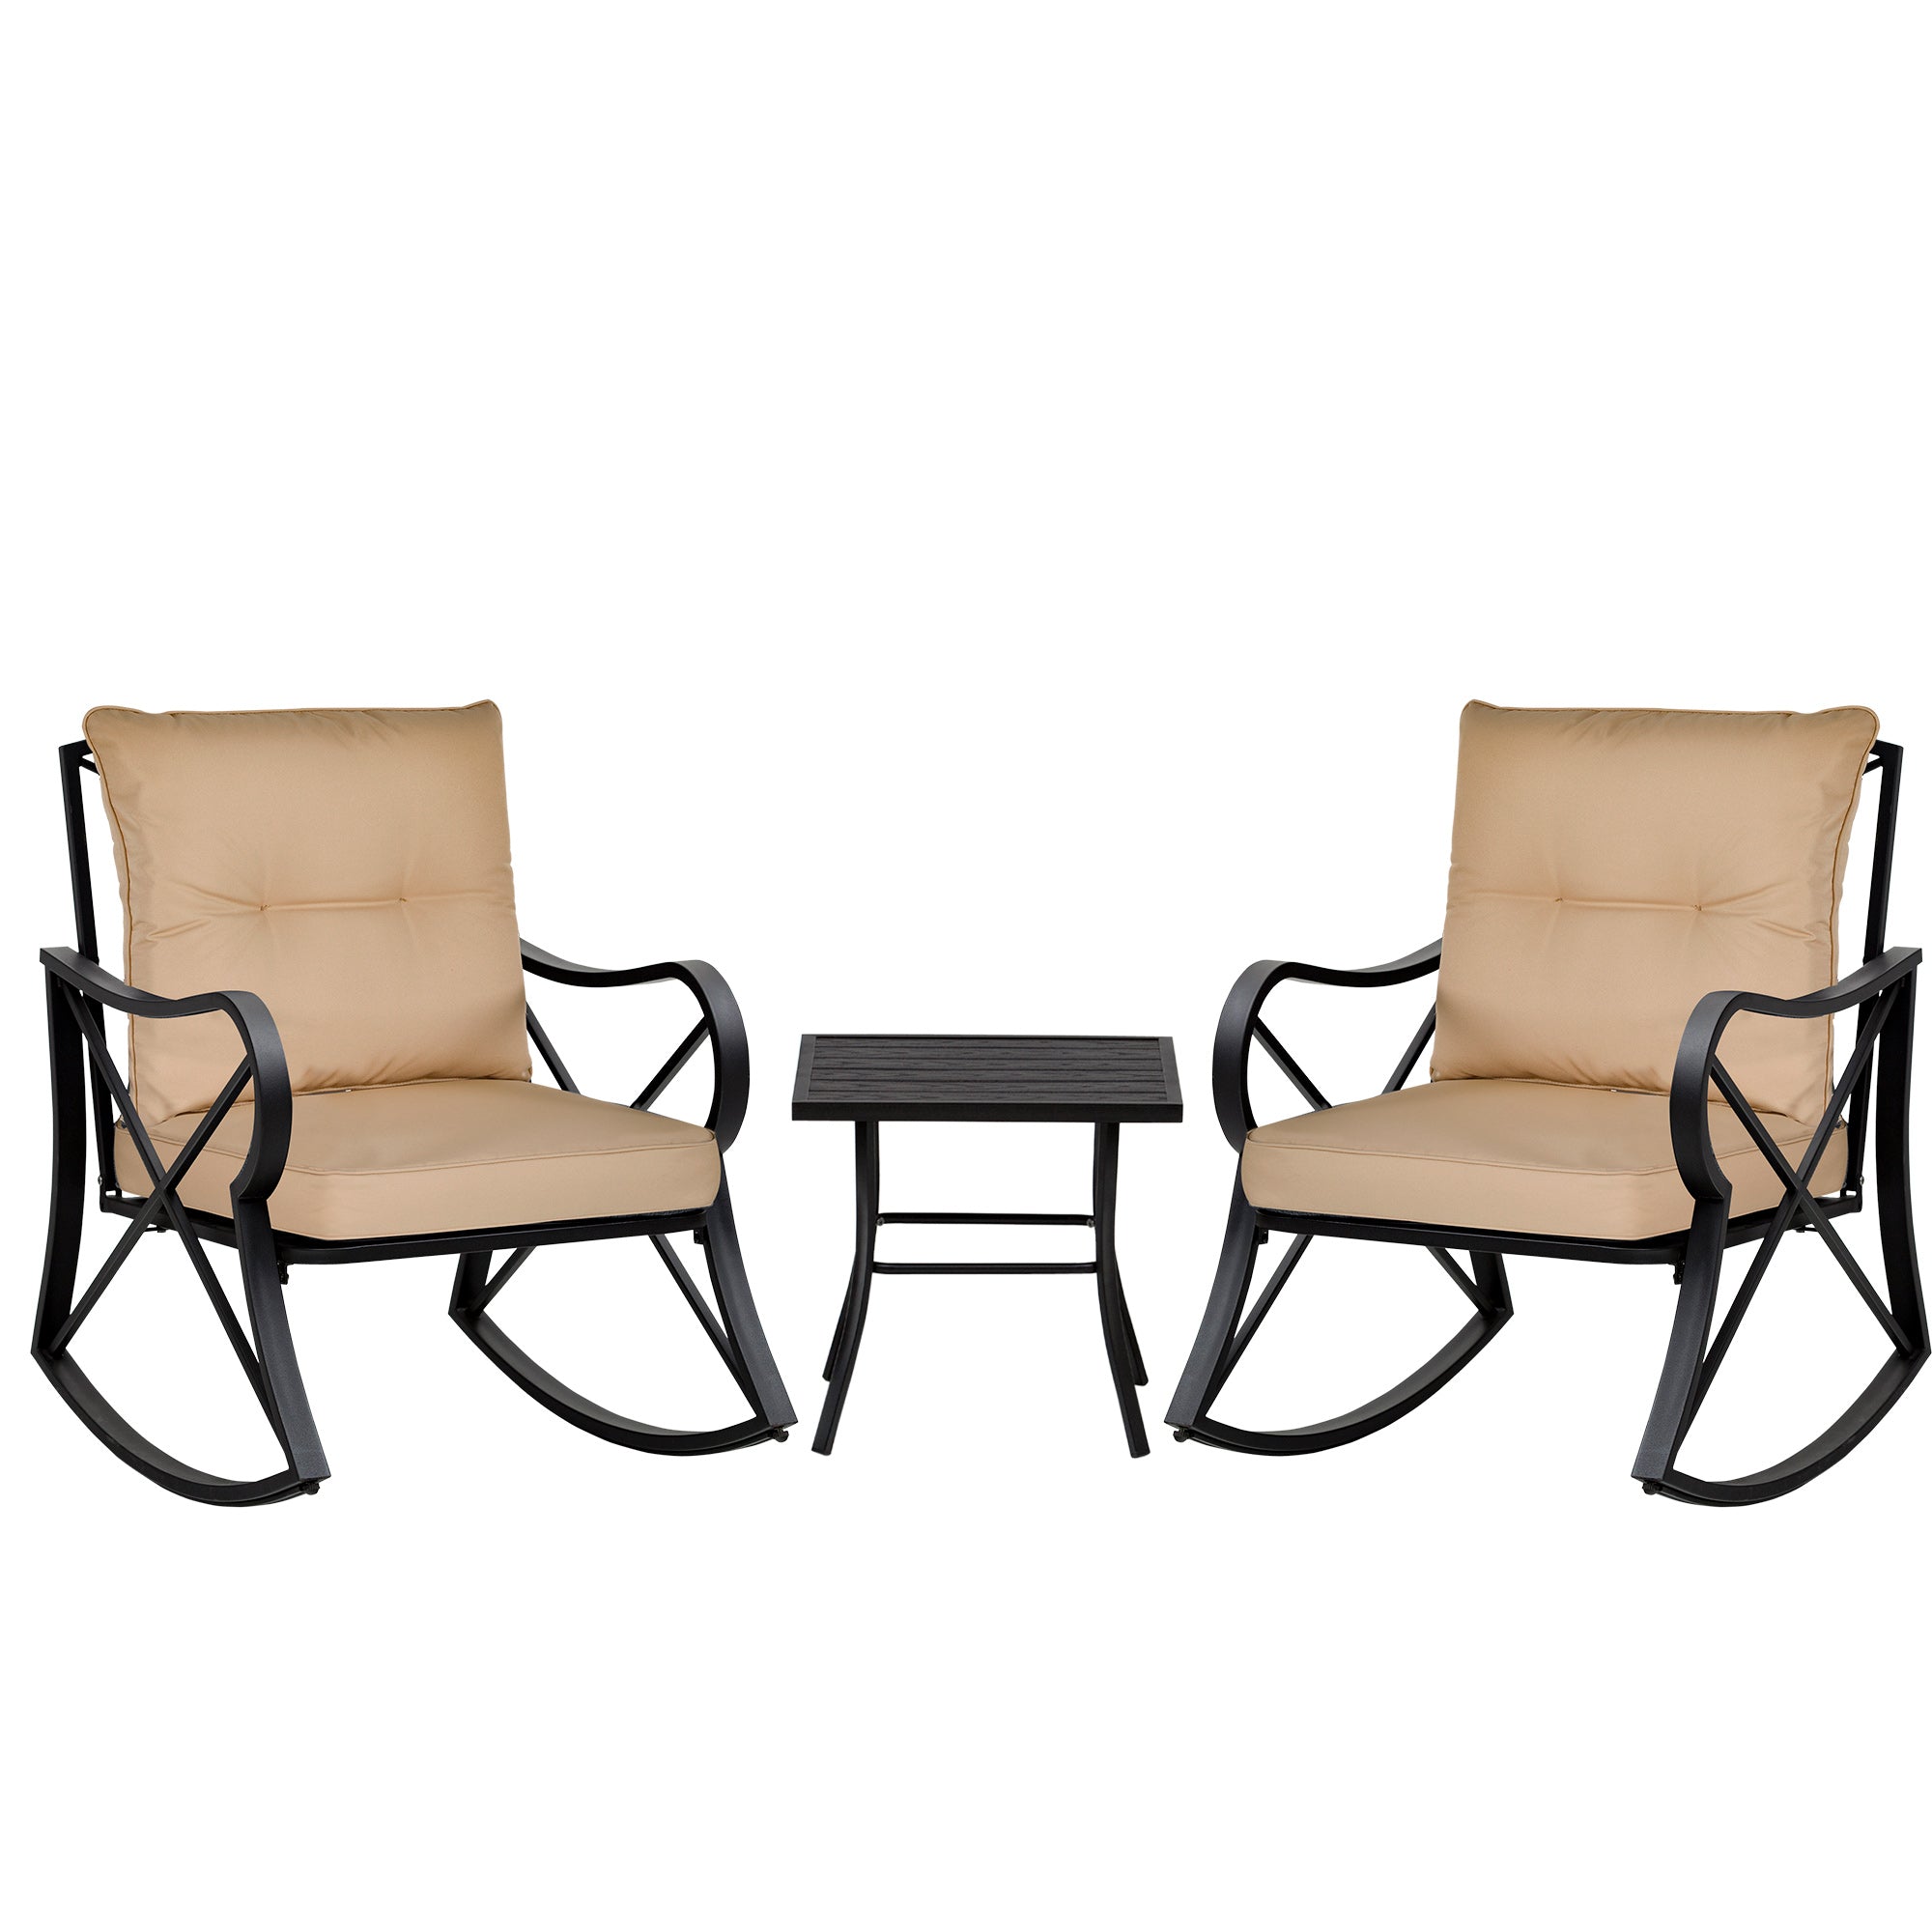 3 Piece Outdoor Patio Rocking Chair Set with Coffee Table Garden Bistro Set with Cushions - Beige